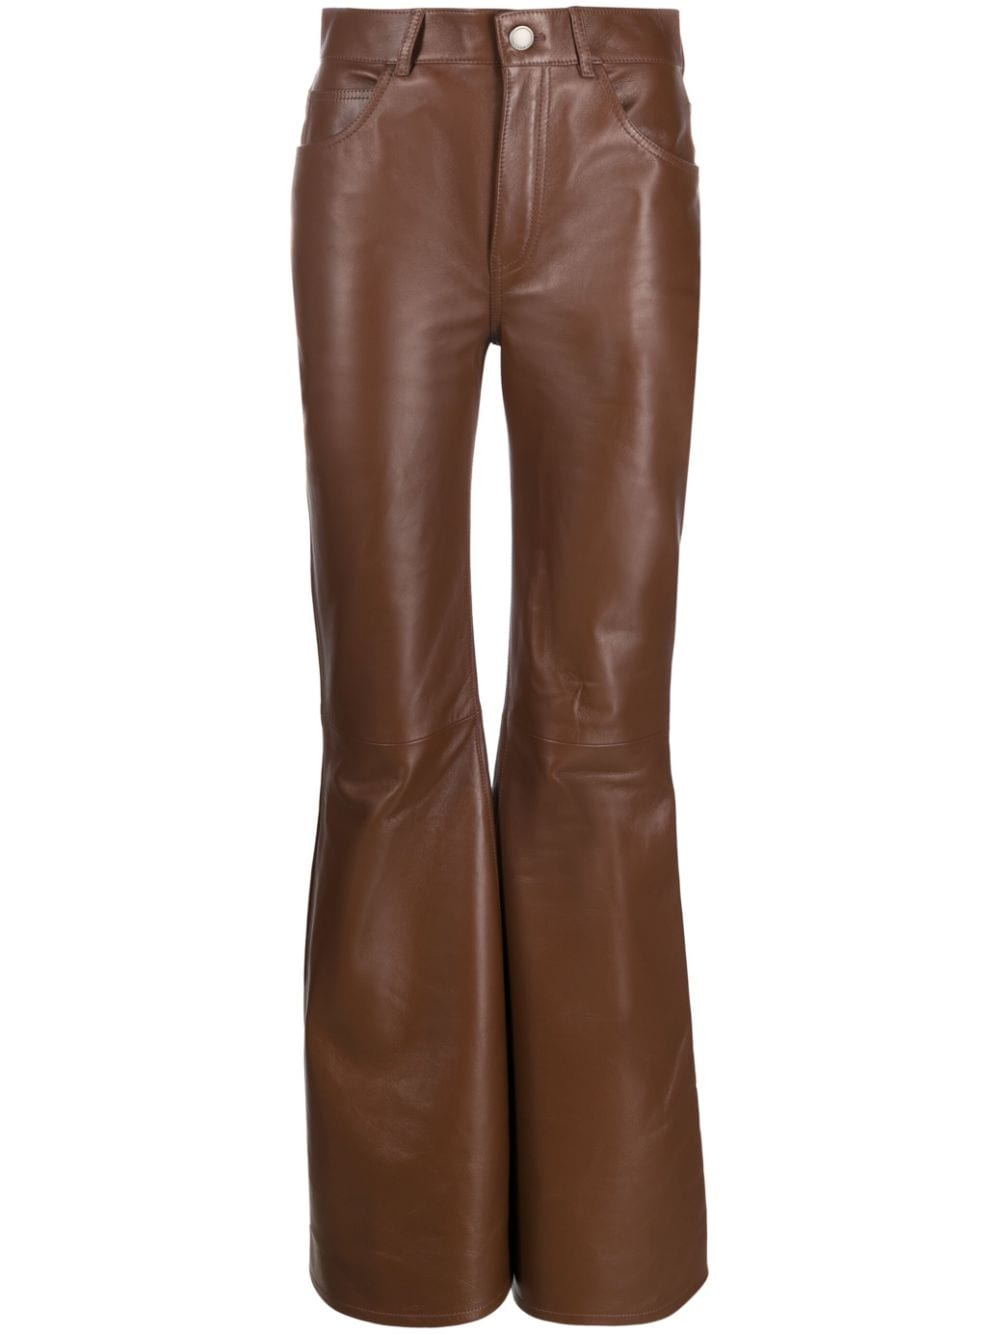 Chloé flared leather trousers - Brown von Chloé